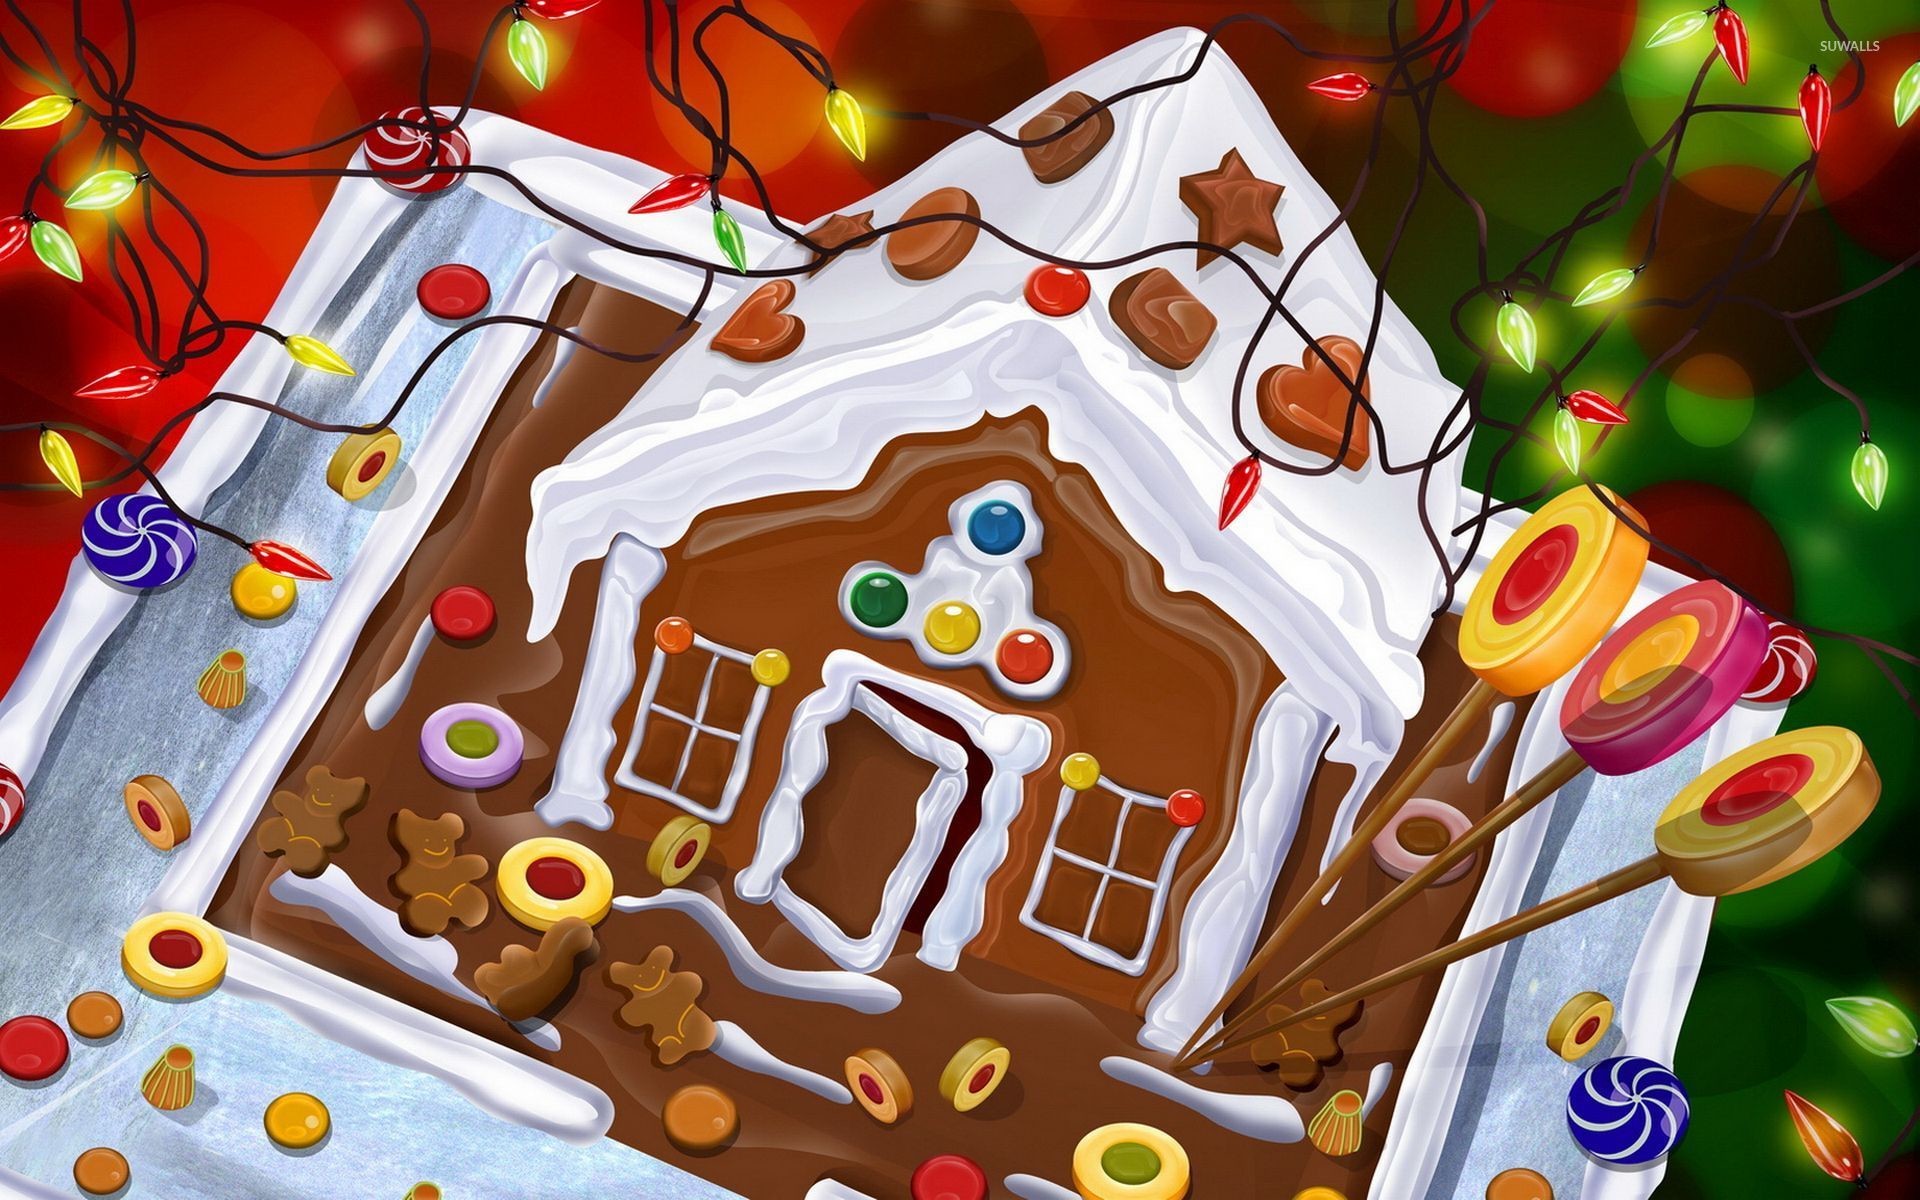 1920x1200 Gingerbread house and candies under the Christmas lights wallpaper   jpg